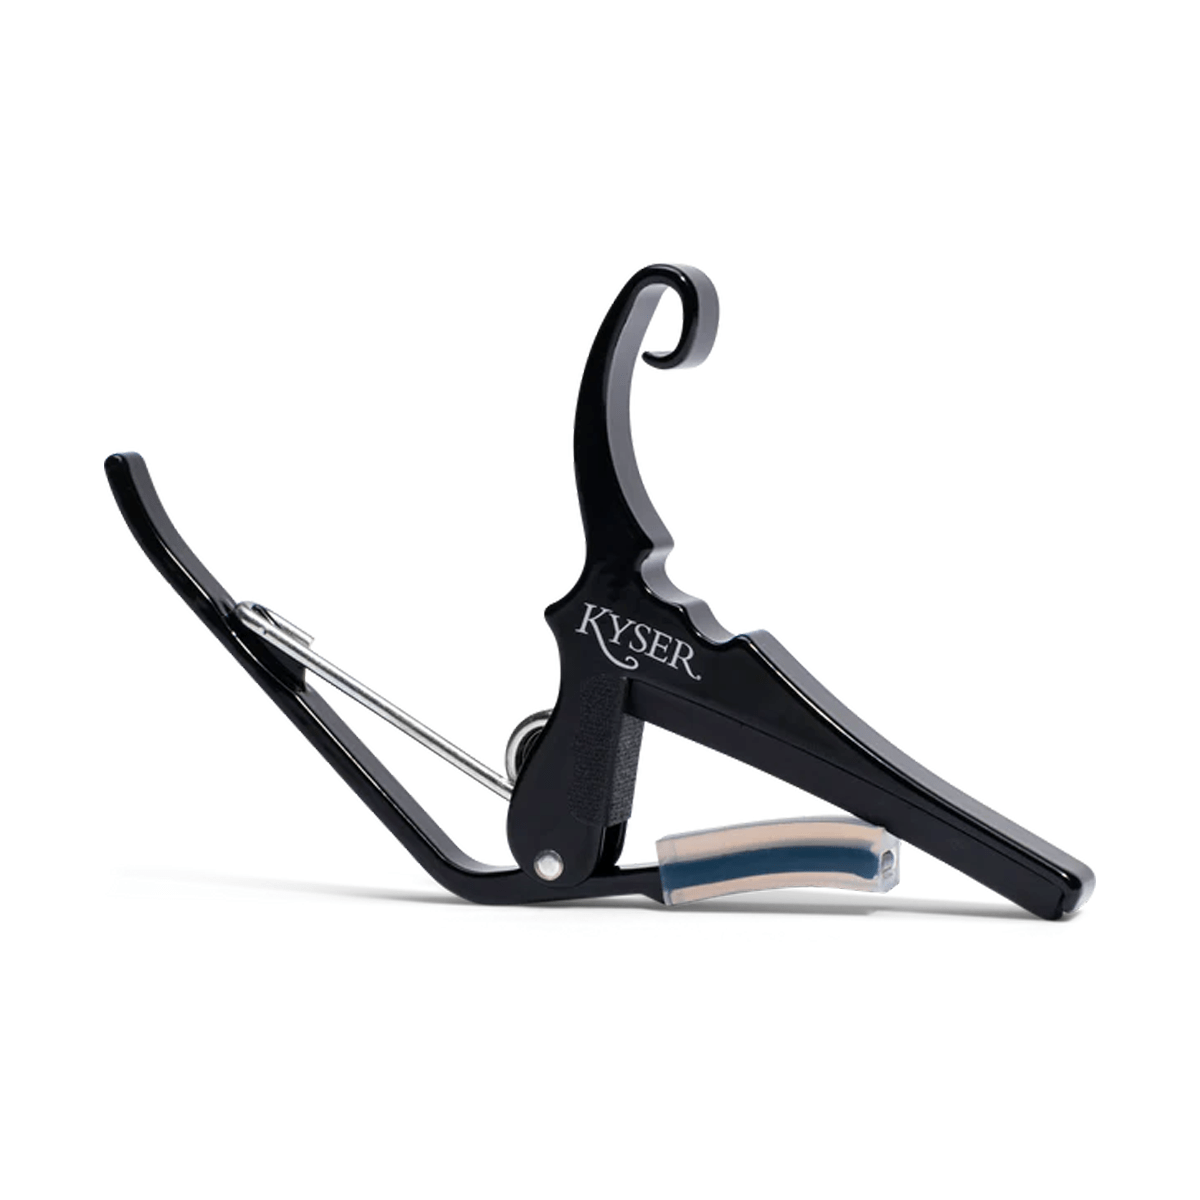 Kyser Home Page Black 12 String Capo for acoustic guitars. More tension/larger body - Byron Music